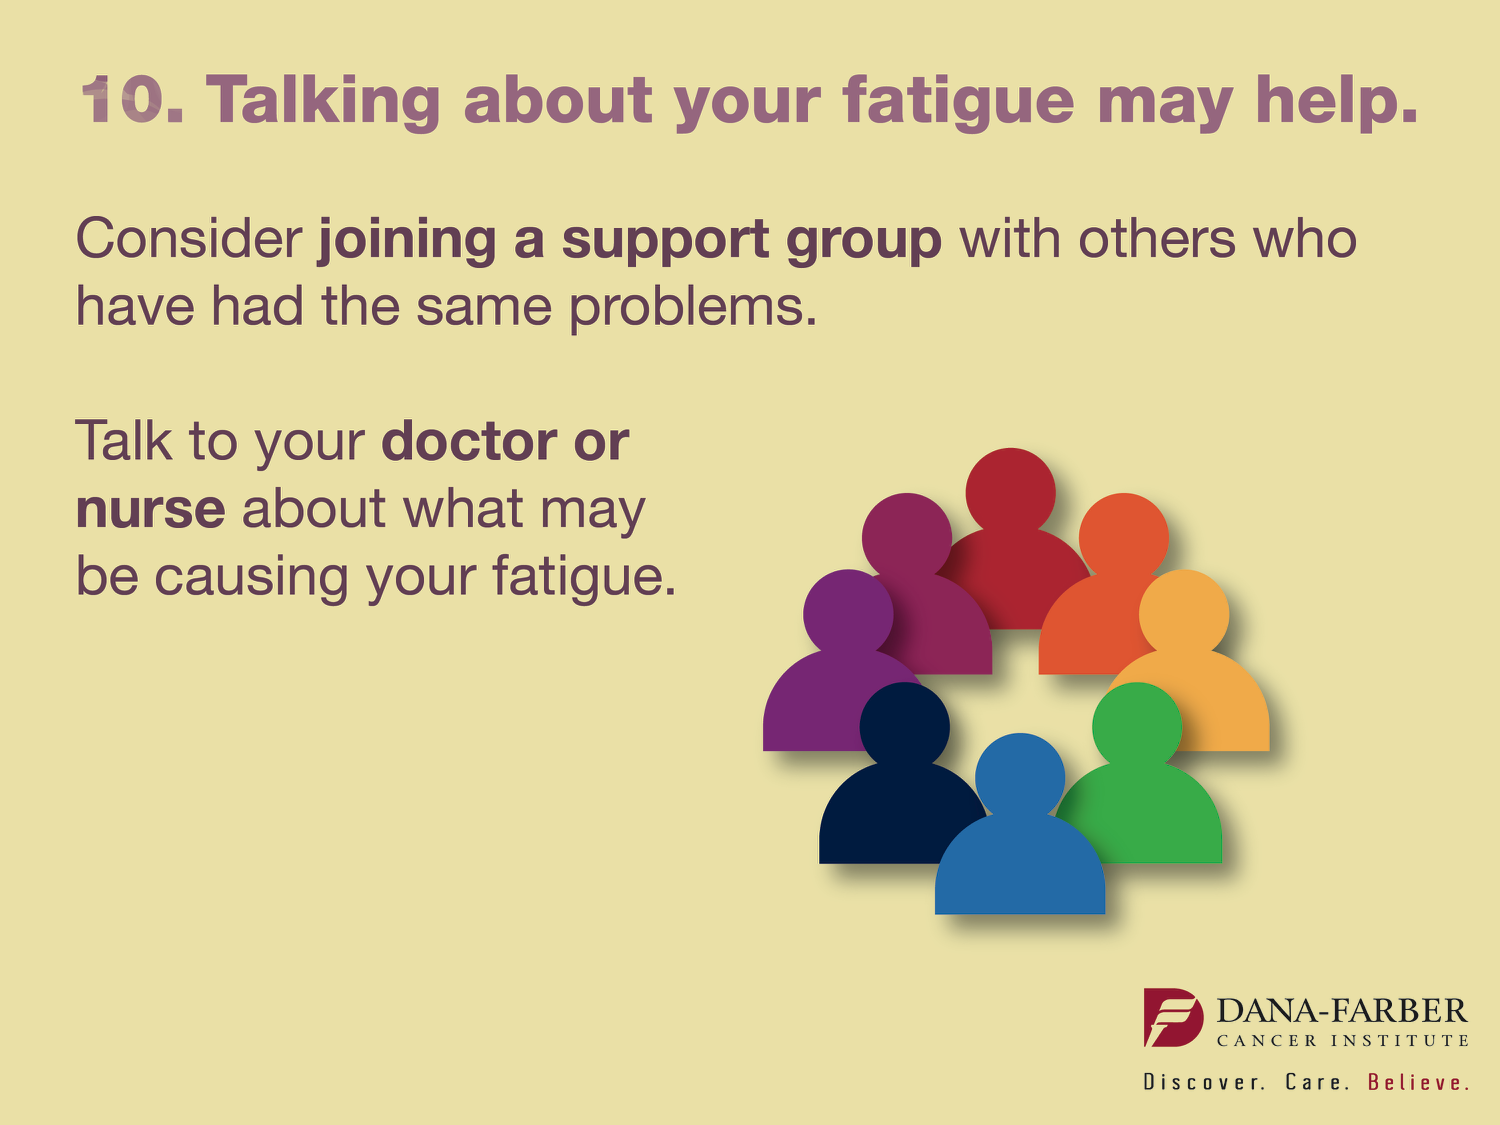 Learn more from Dana-Farber's Health Library